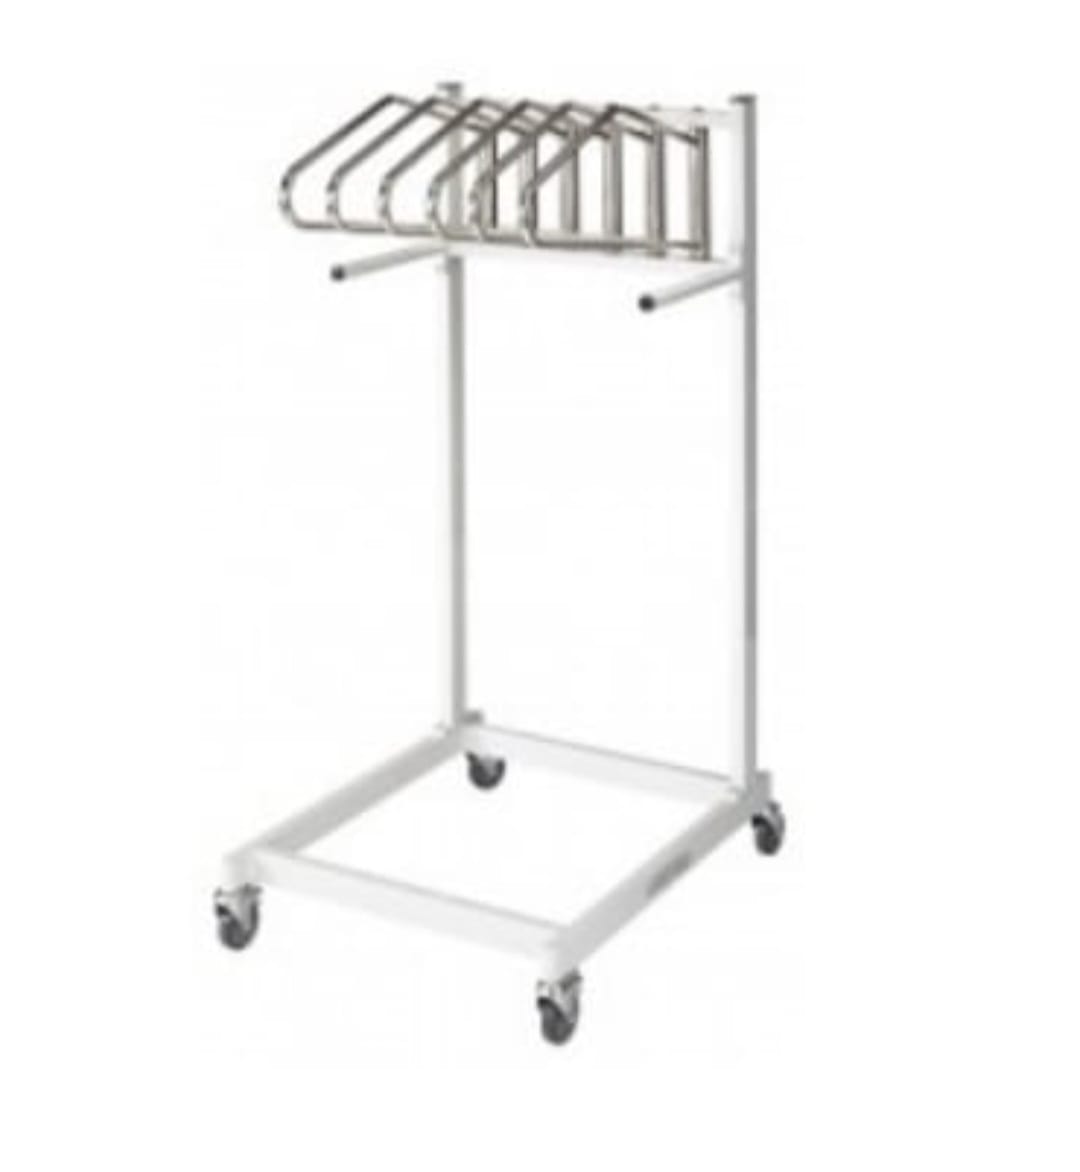 MOBILE LEAD APRON HANGER- FOR 5 APRONS